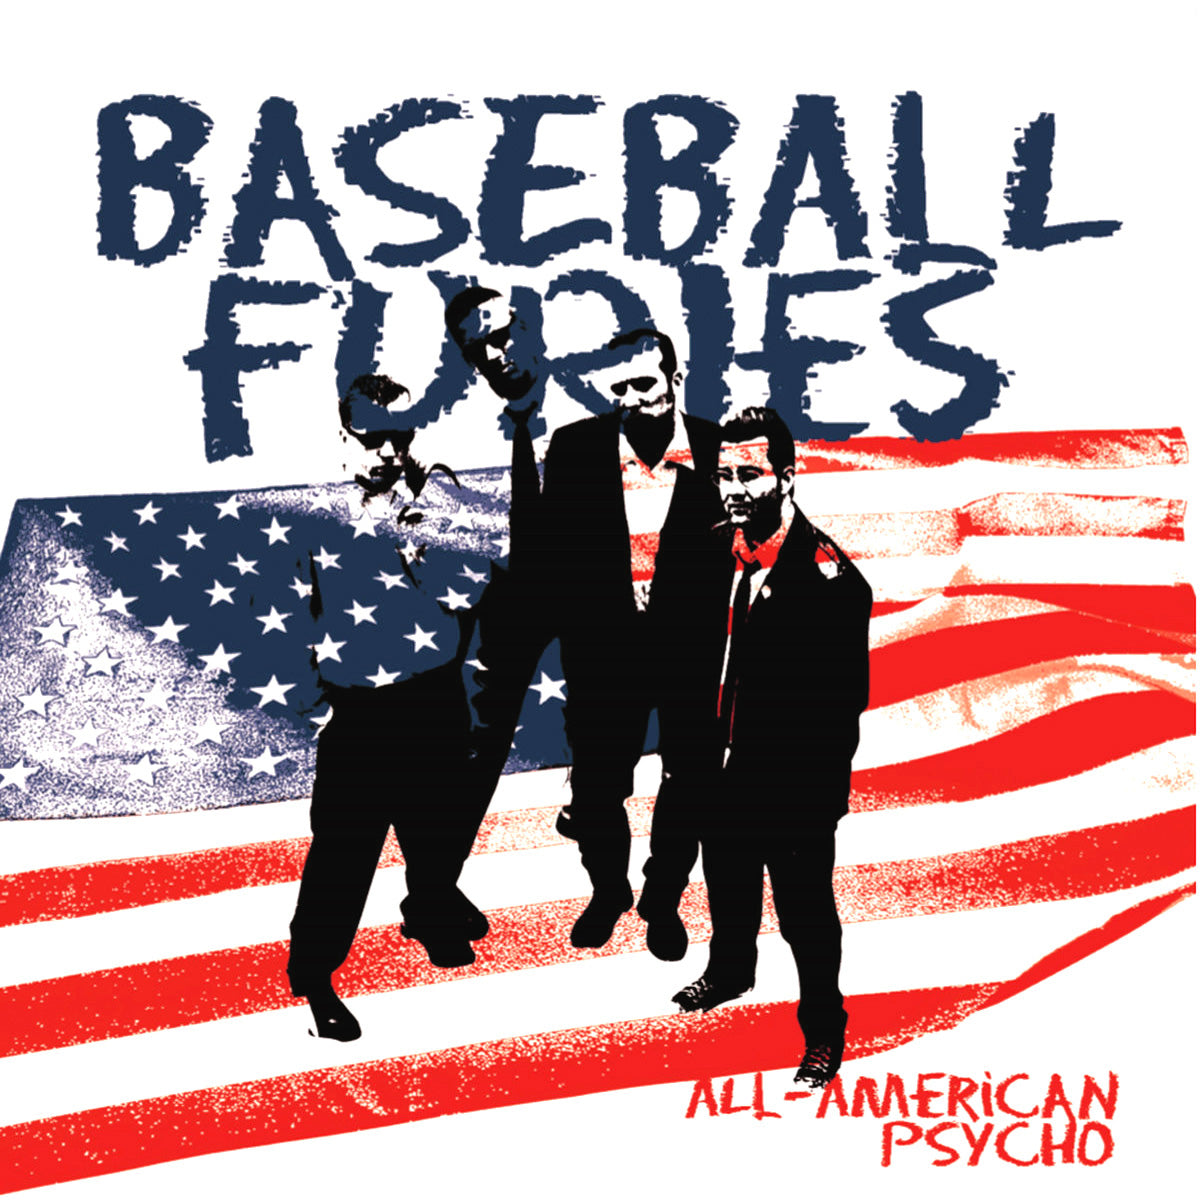 Baseball Furies- All American Psycho LP ~REISSUE / RARE RED WAX!